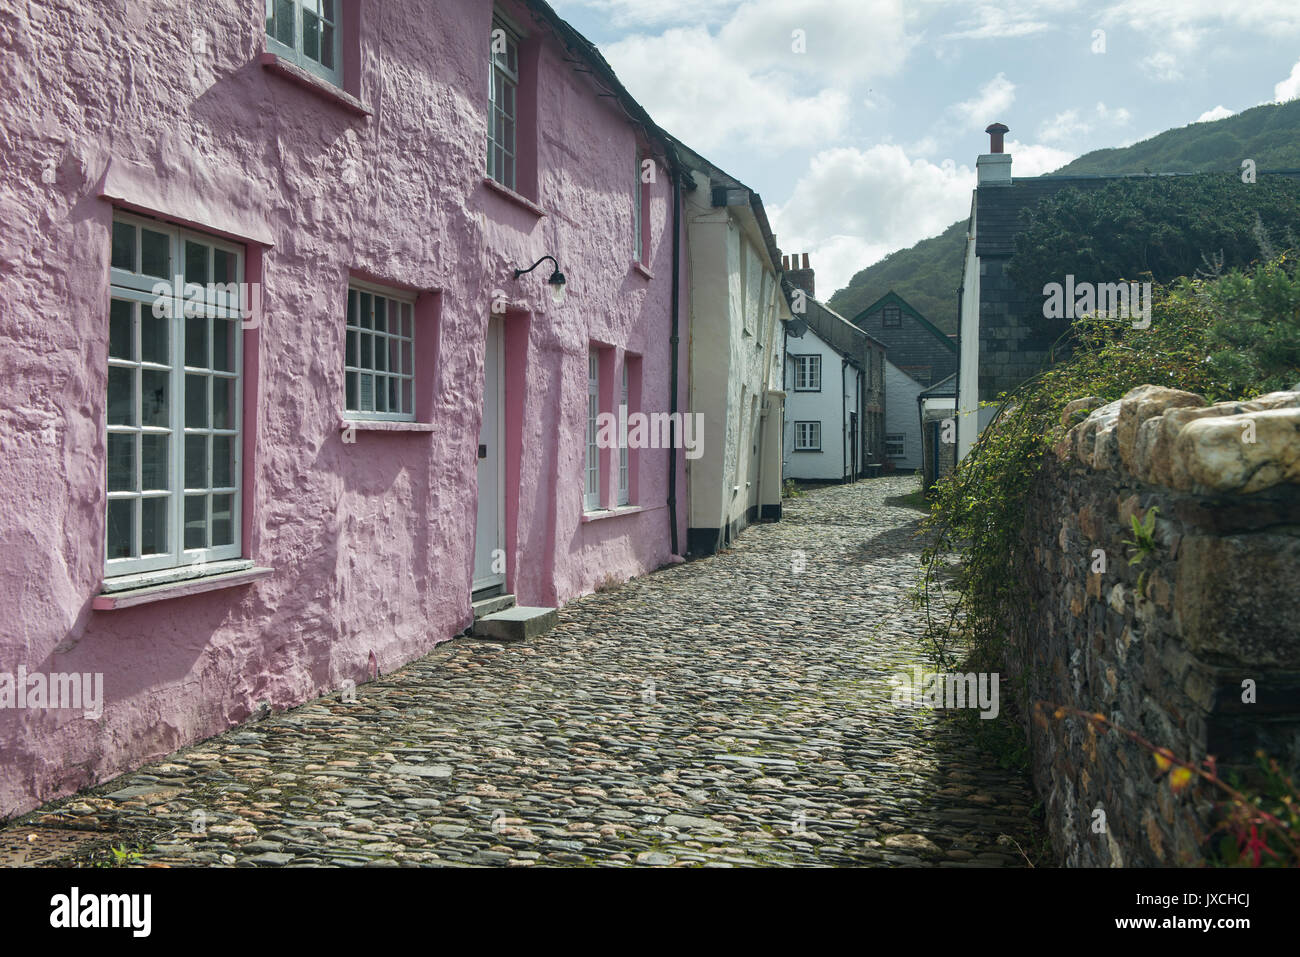 Country cottages in a side street in Boscastle, Cornwall, England. United Kingdom. Stock Photo